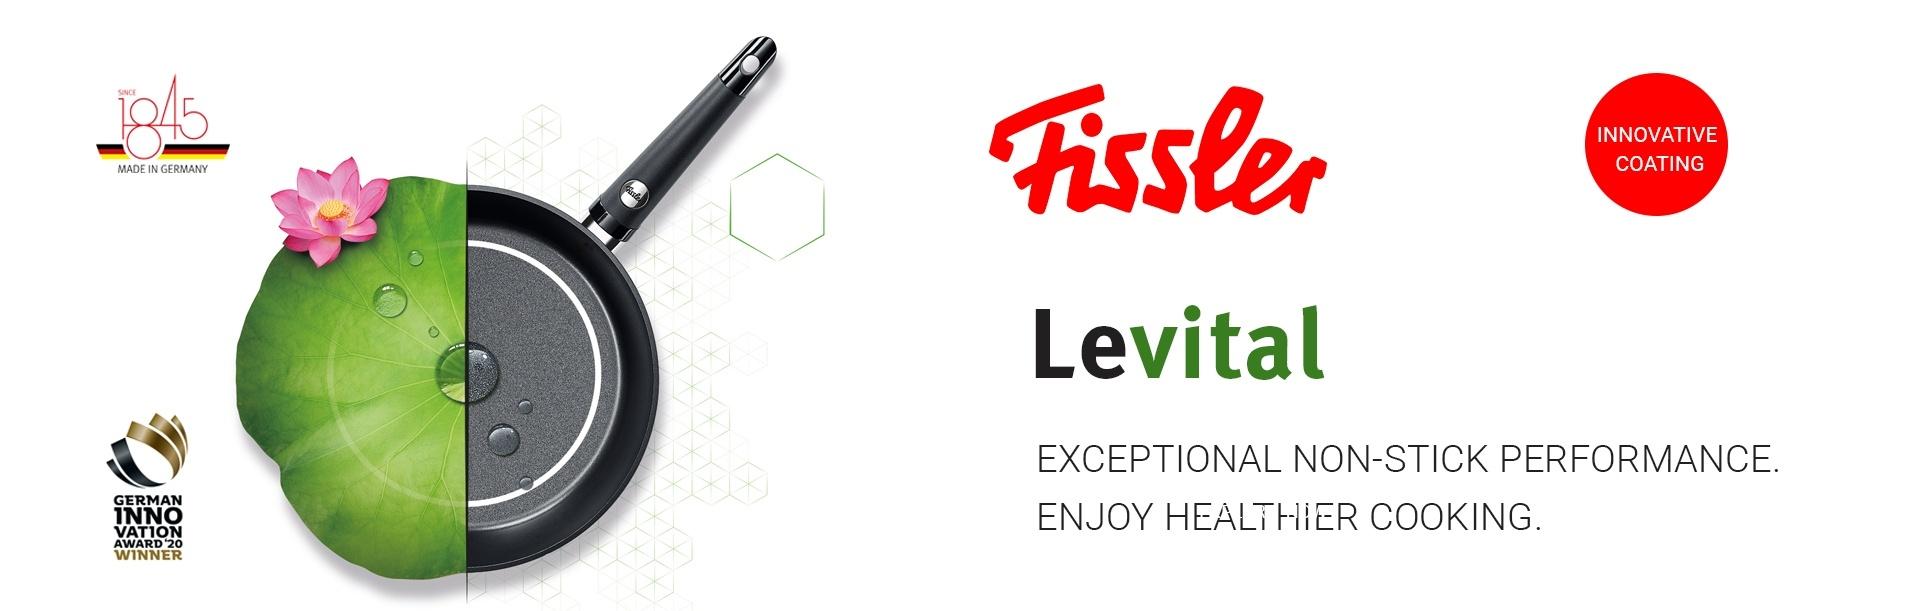 Fissler lifestyle products slide 4